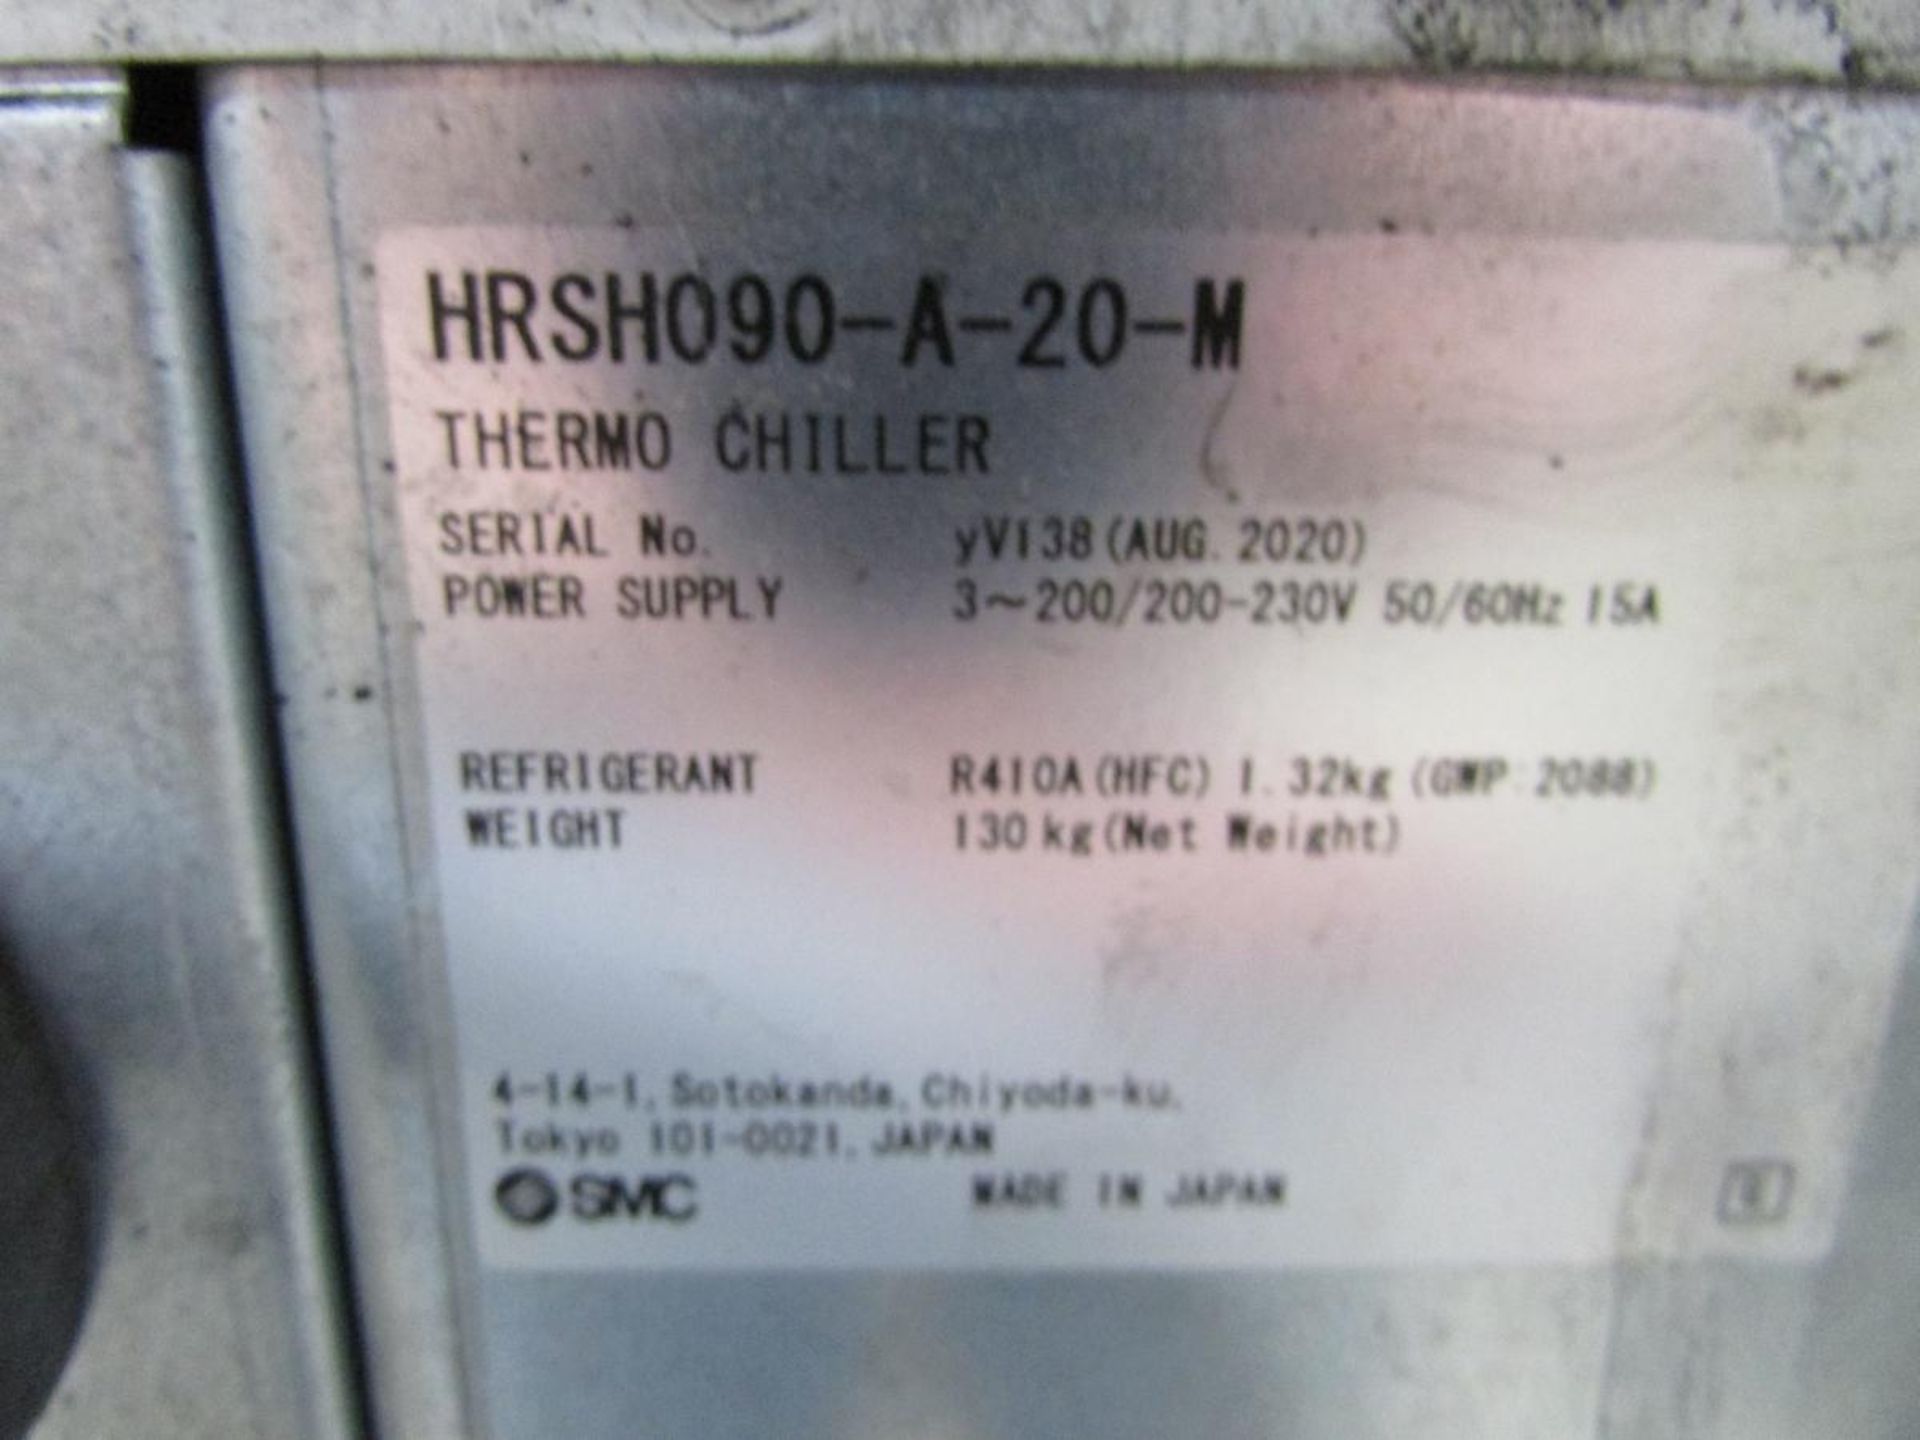 2020 SMC HRSH090-A-20-M Thermo Chiller - Image 6 of 6